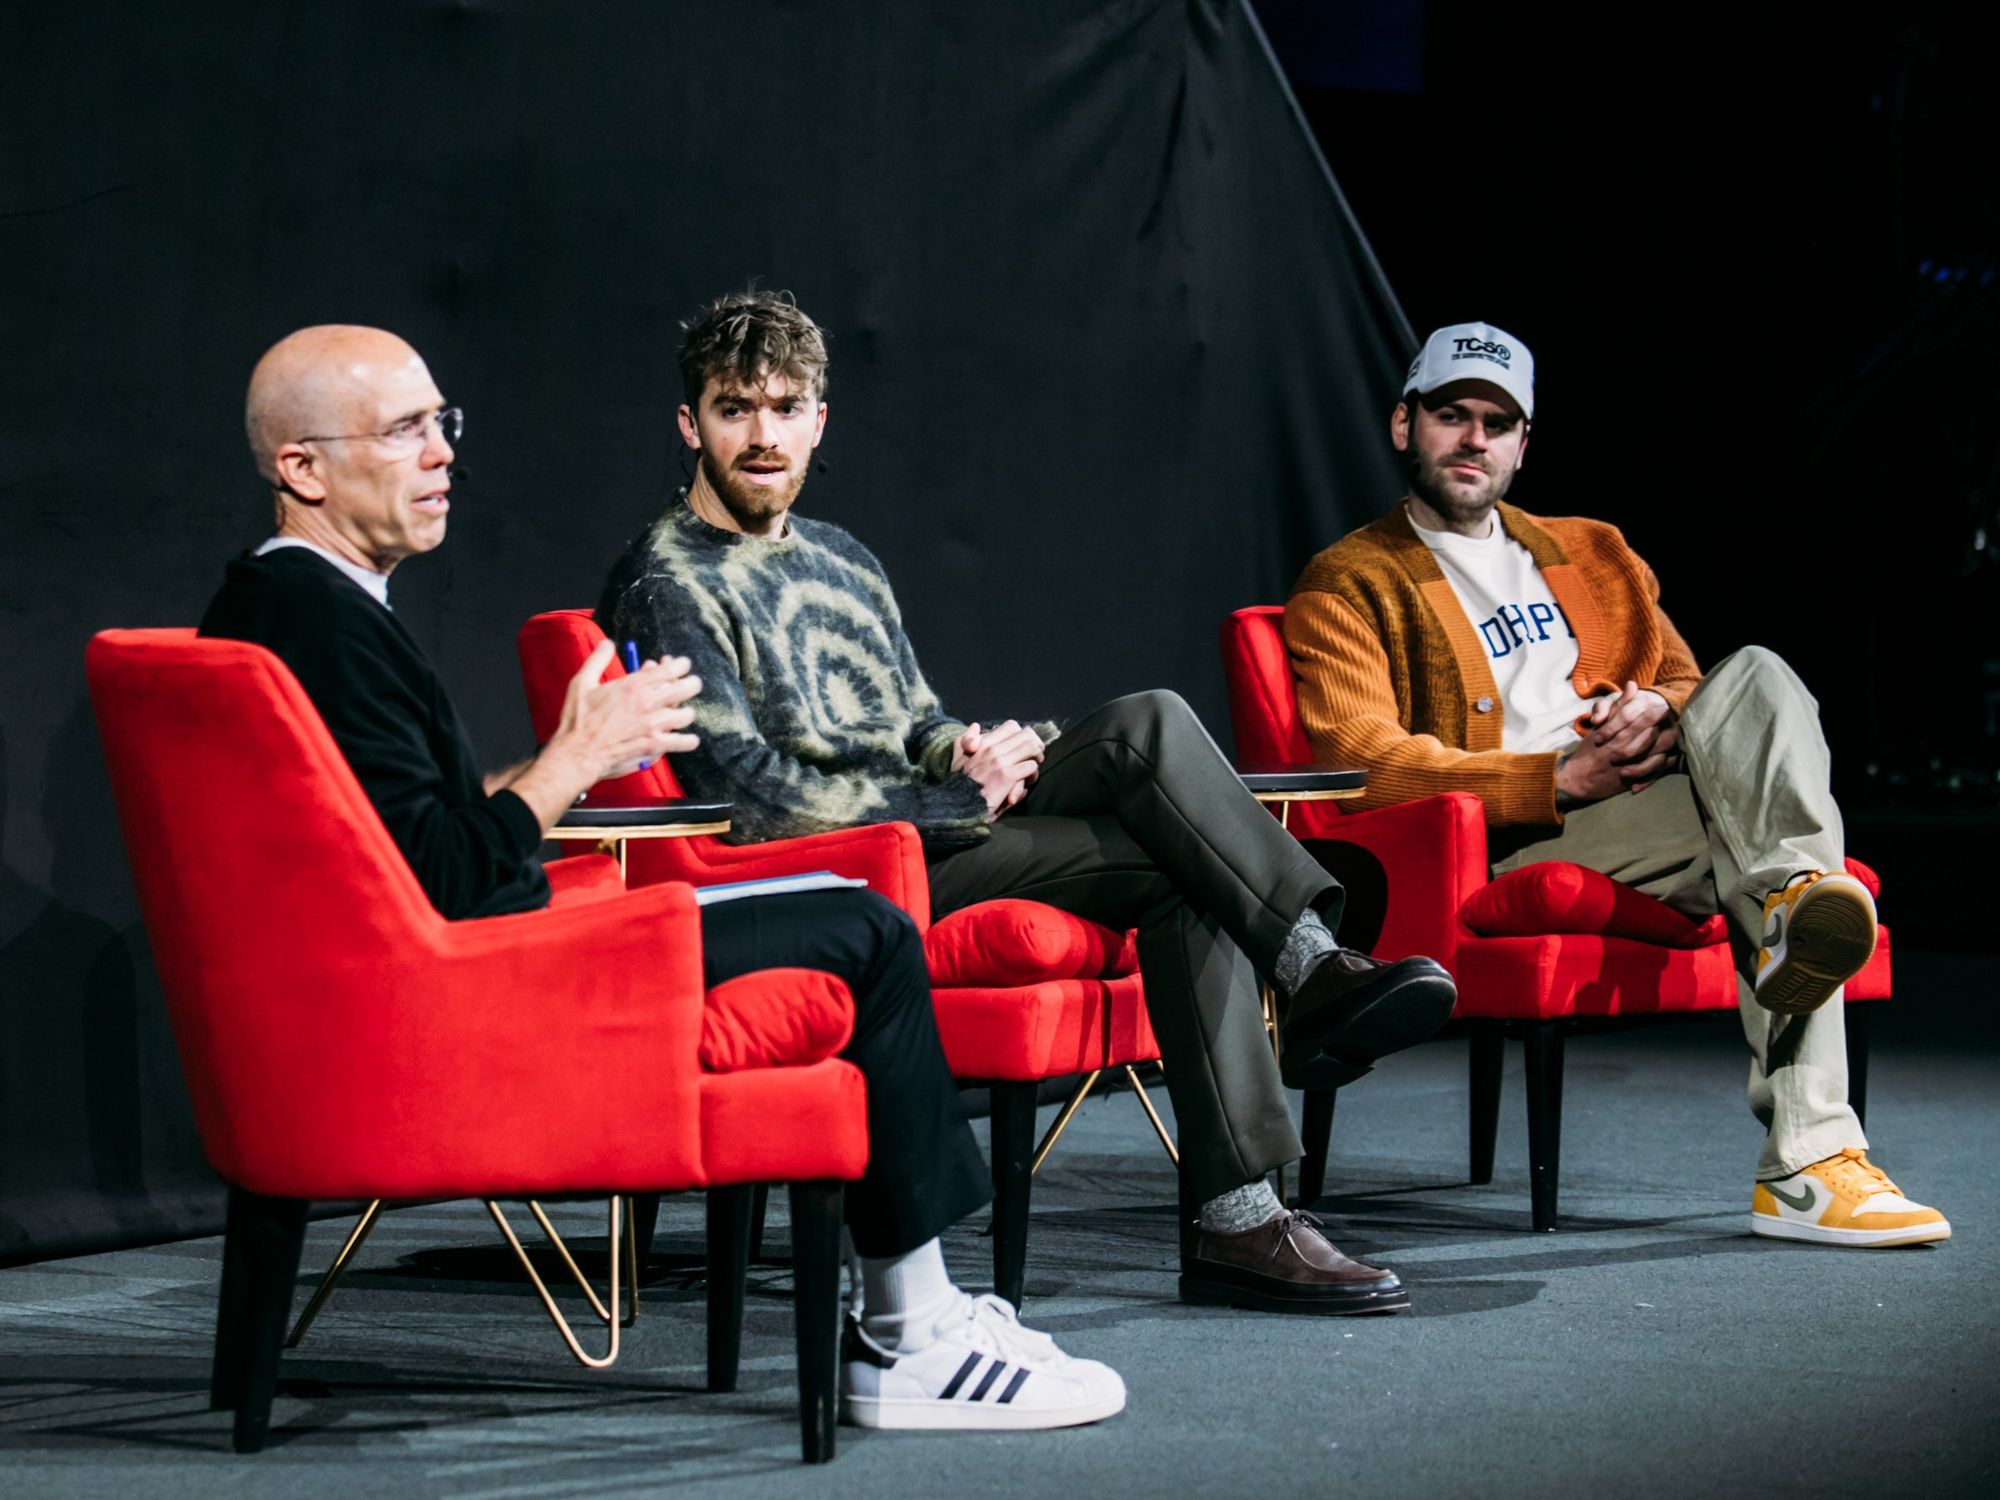 Upfront Ventures Summit: The Chainsmokers Journey From Music to Venture